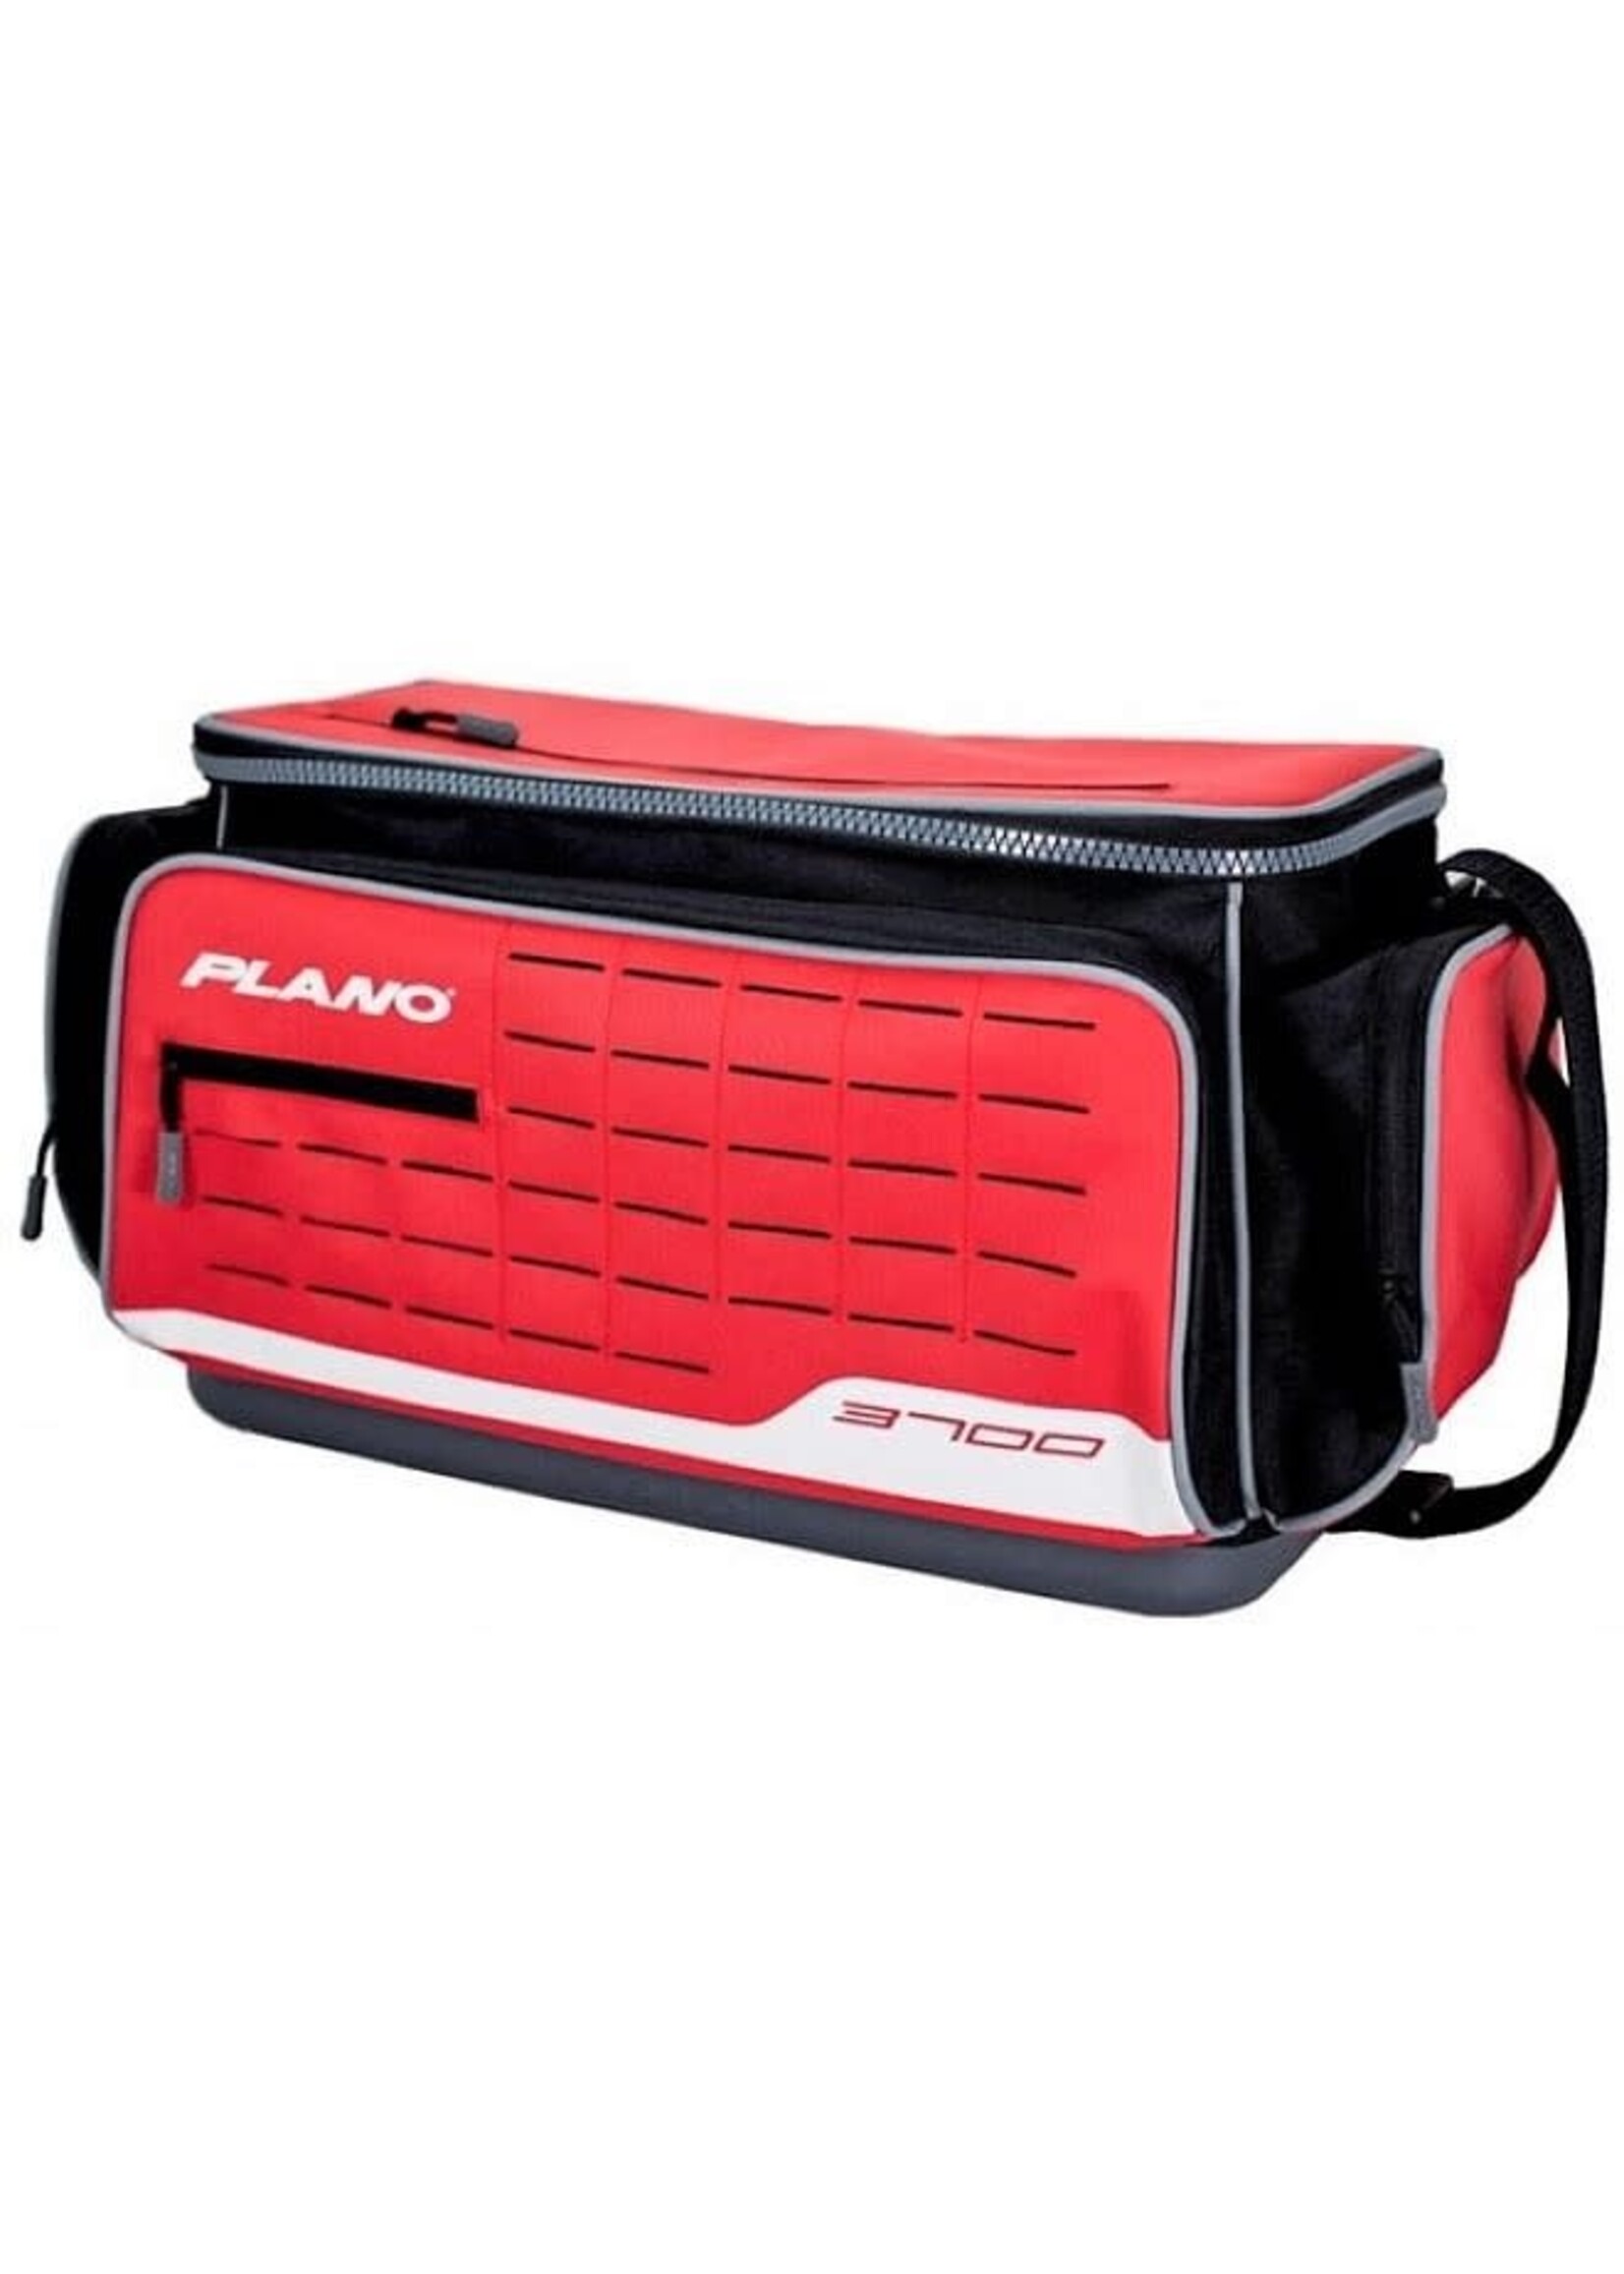 Plano Plano Weekend Series 3700 Deluxe Tackle Bag